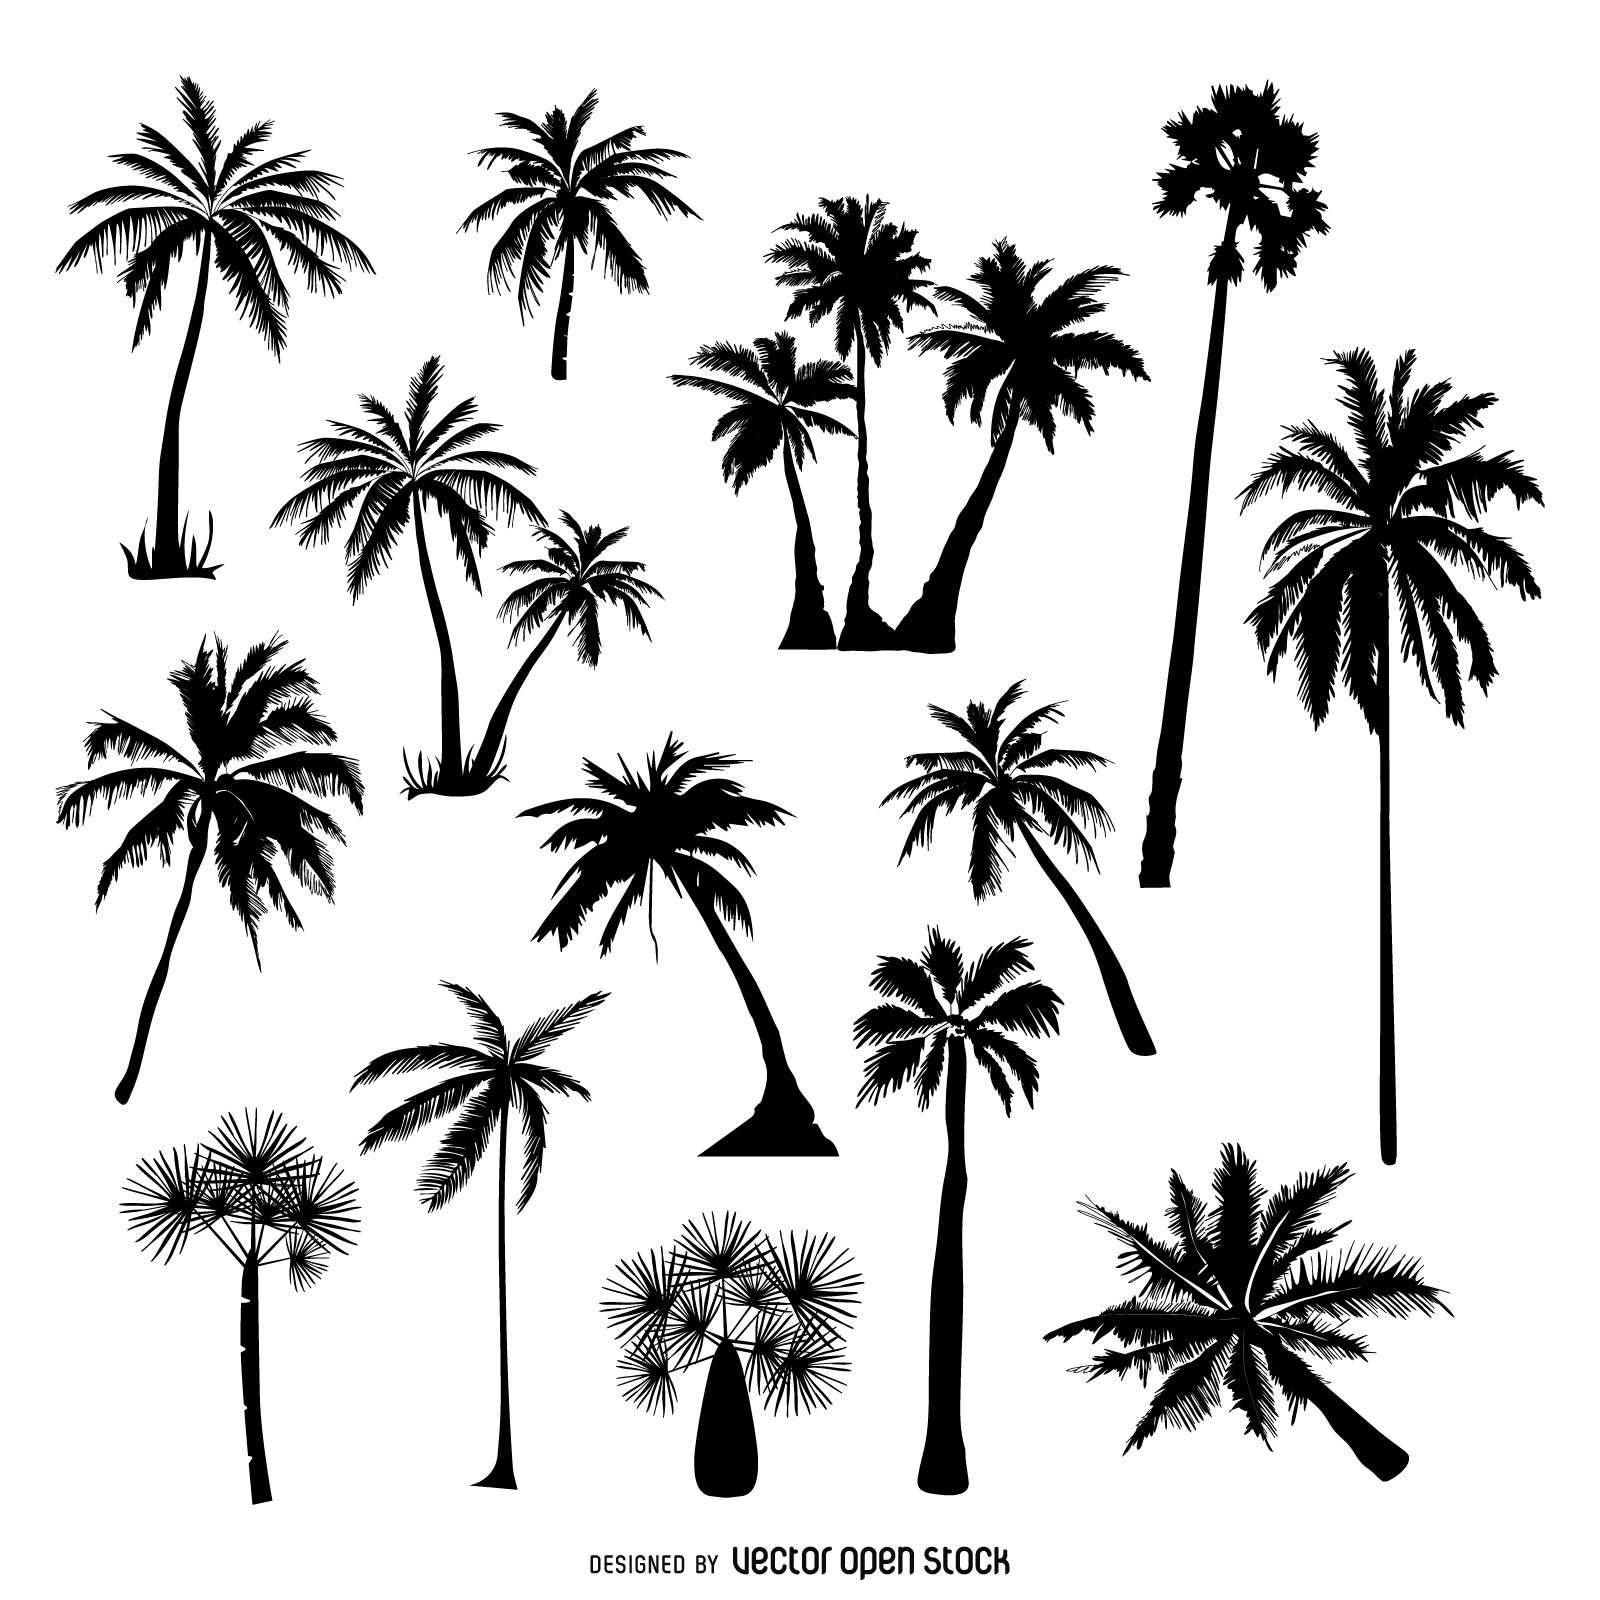 Collection of palm tree silhouettes - Vector download